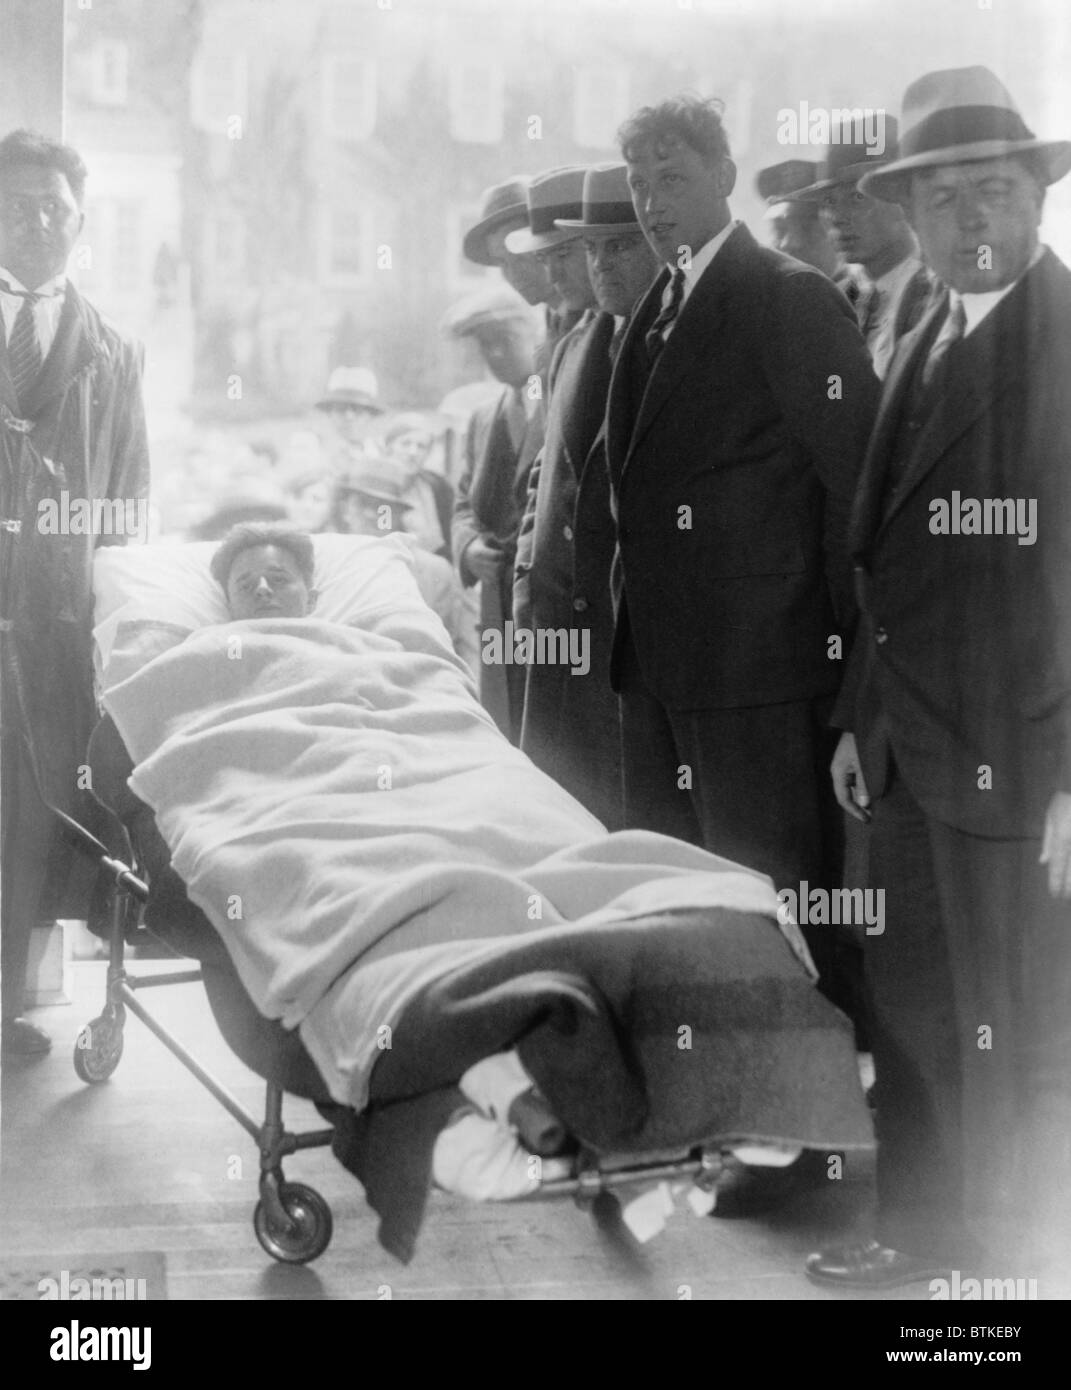 Francis 'Two Gun' Crowley (1911-1932), a robber and cop killer, arrives at his arraignment in a gurney, still recovering from the bullet wounds sustained during his capture by police. May 8, 1931. Stock Photo